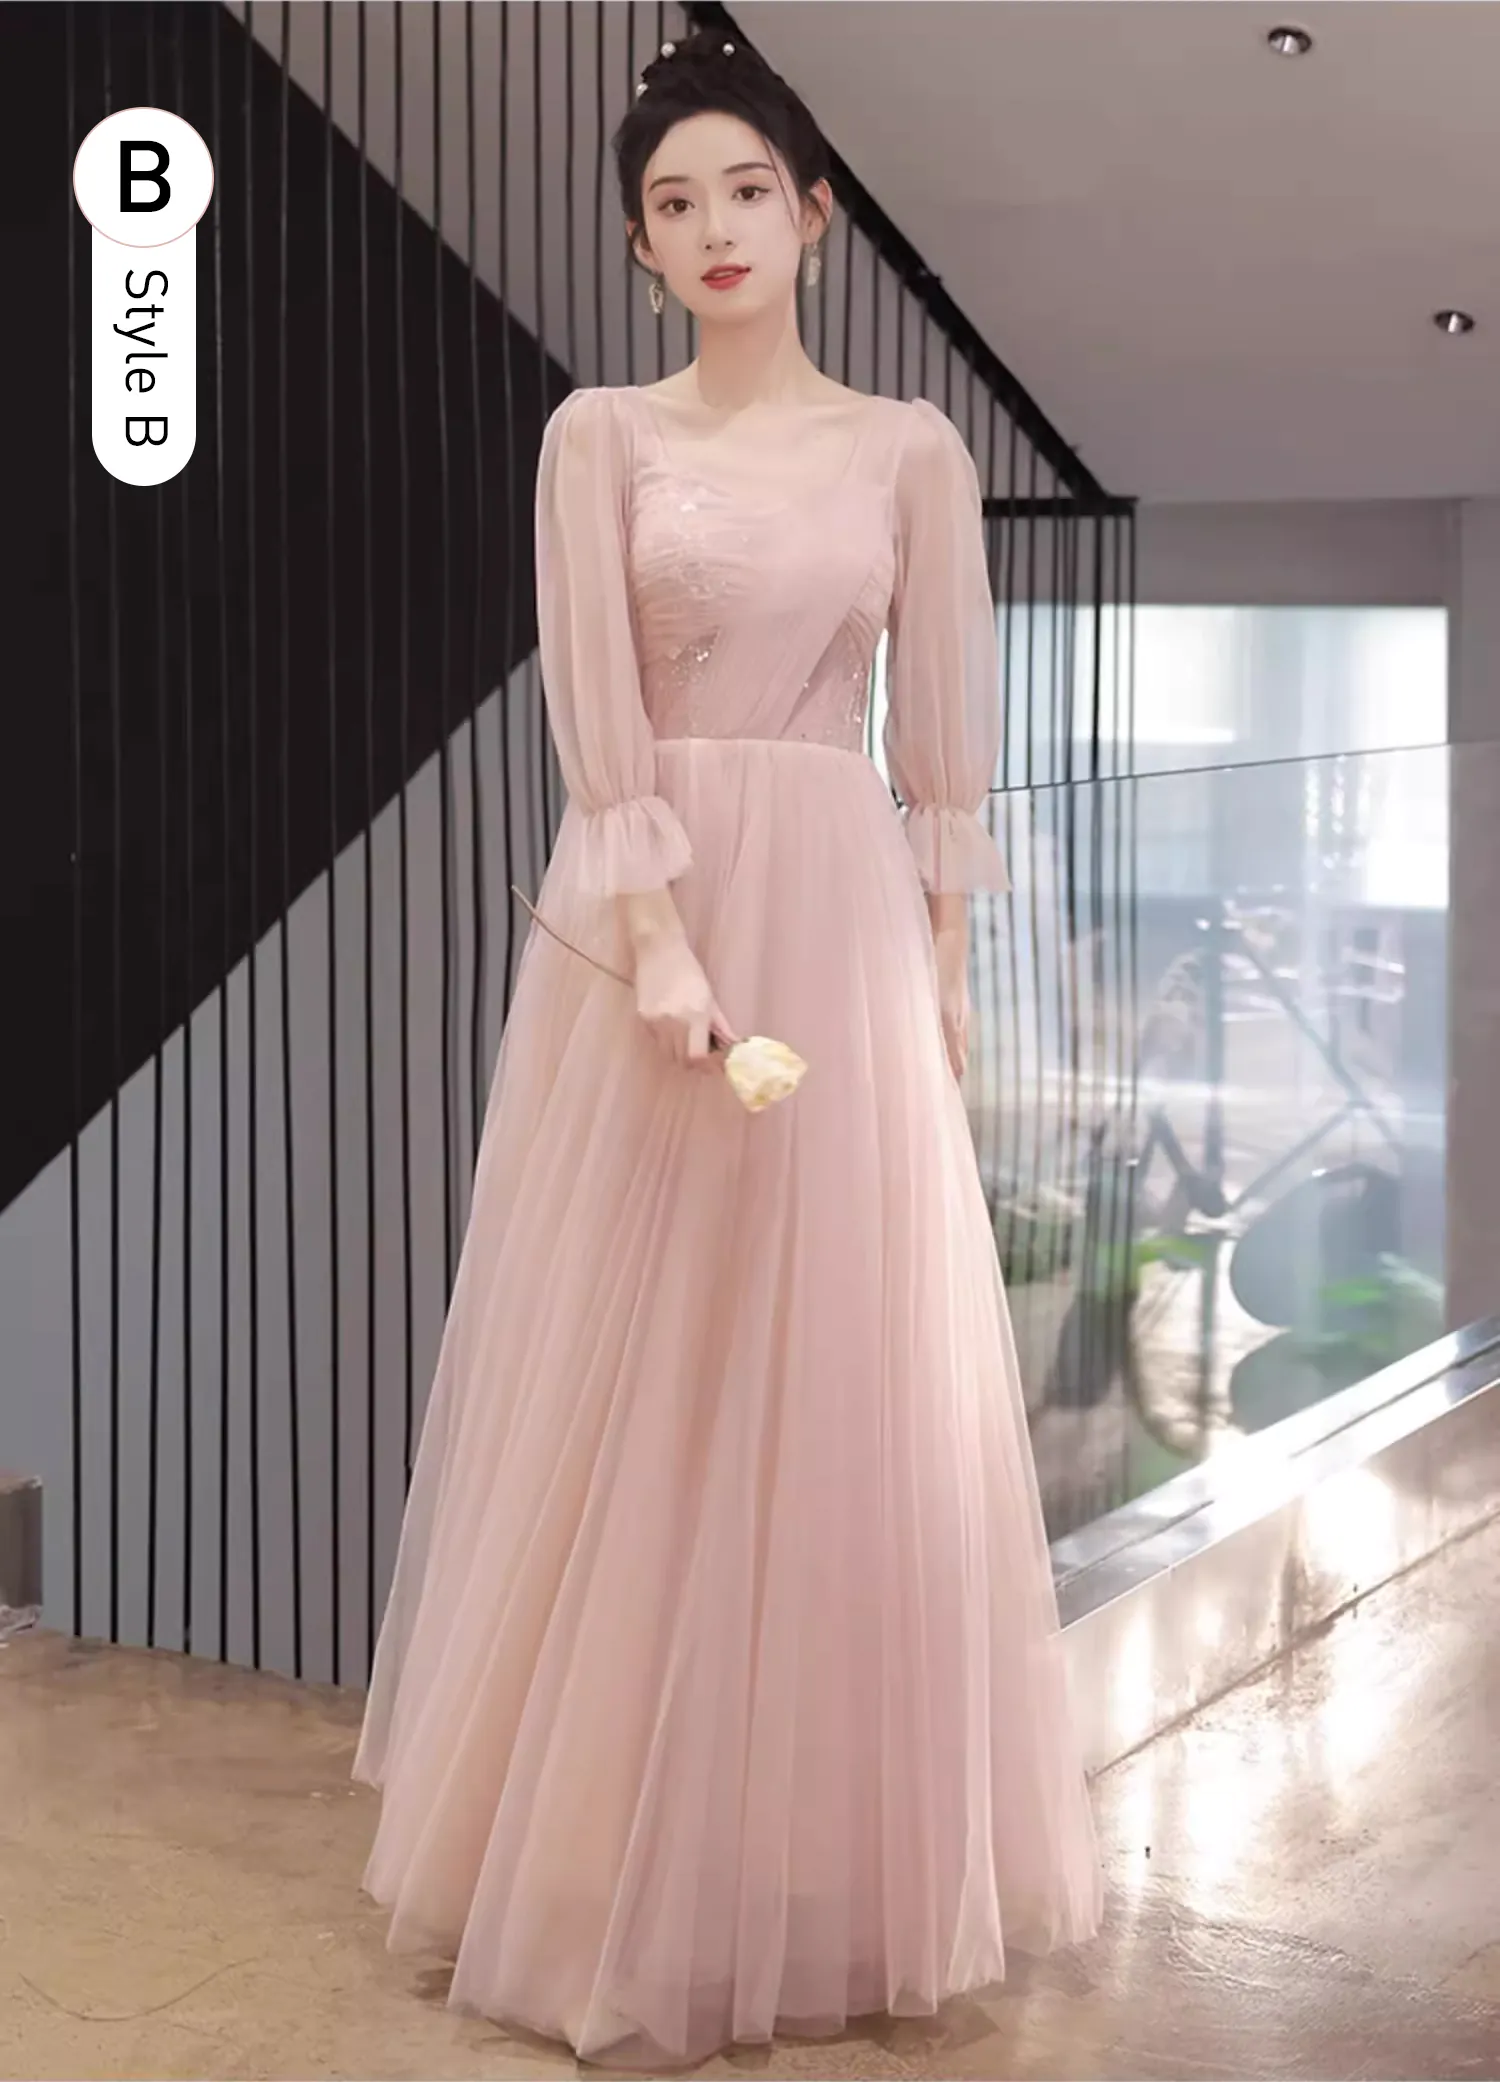 Trendy-Pink-Mesh-Chiffon-Bridesmaid-Maxi-Dress-Evening-Party-Gown16